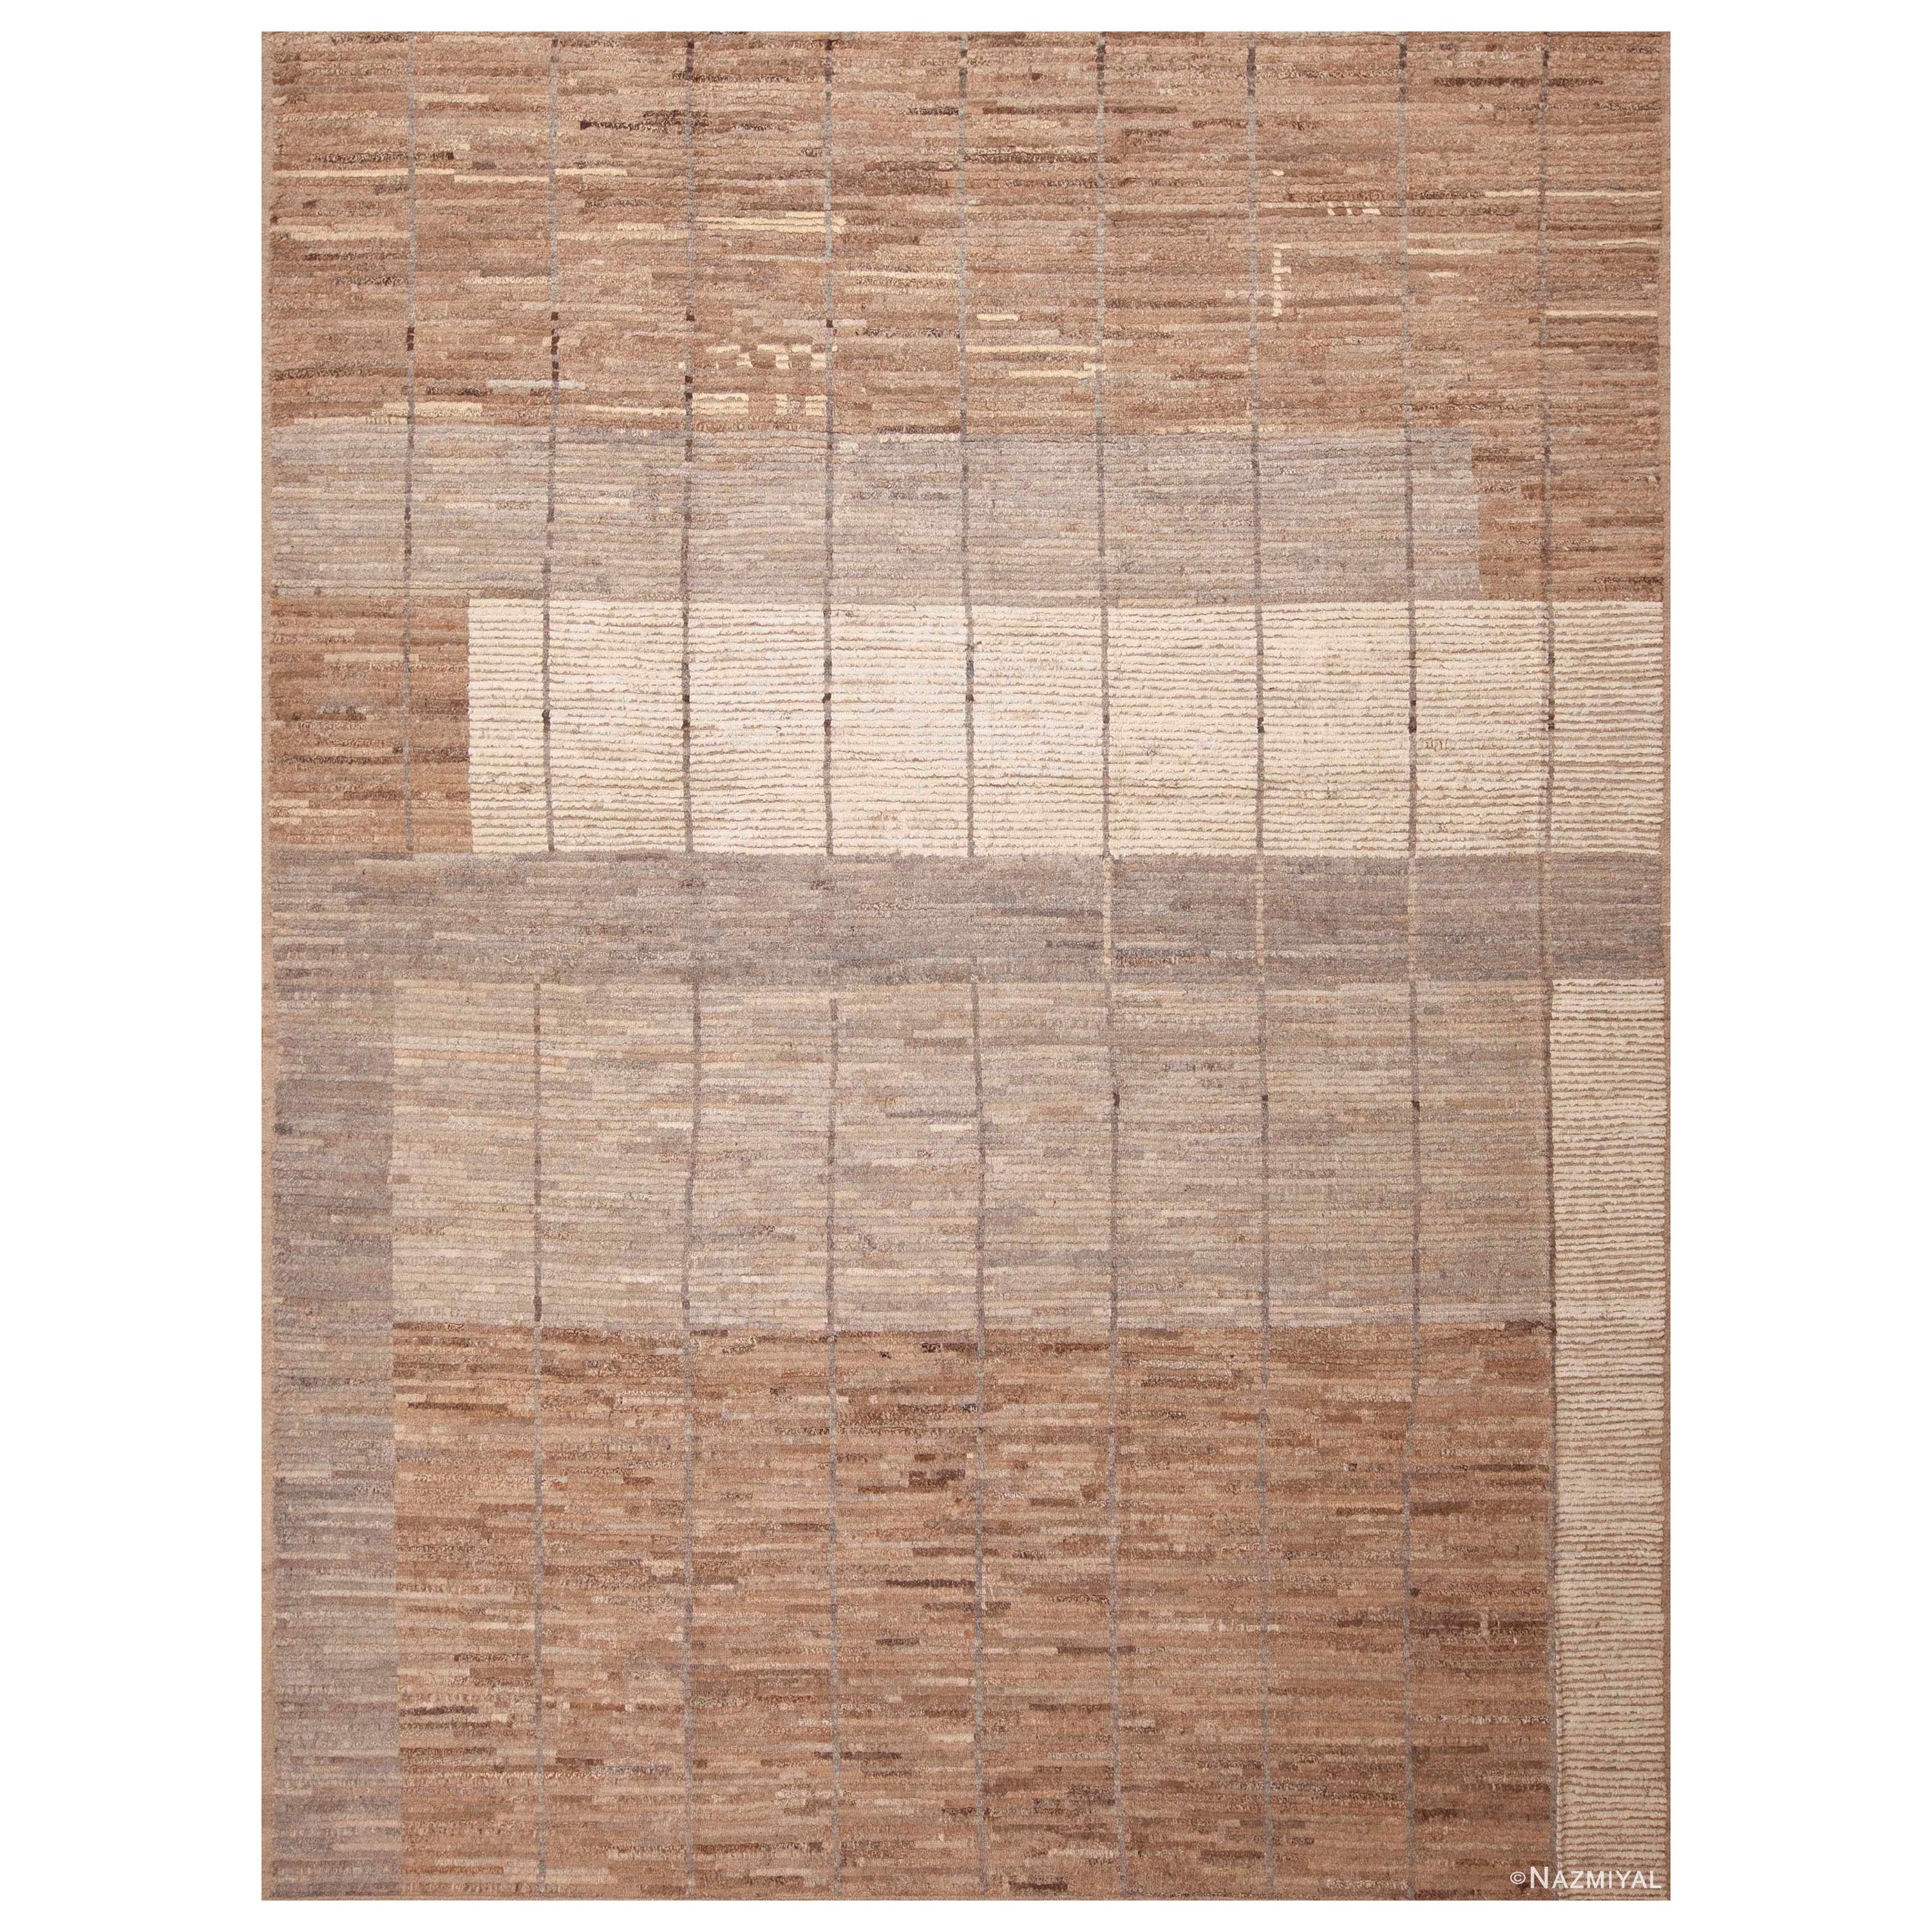 Nazmiyal Collection Modern Minimalist Earthy Color Room Size Rug 10'5" x 13'7" For Sale